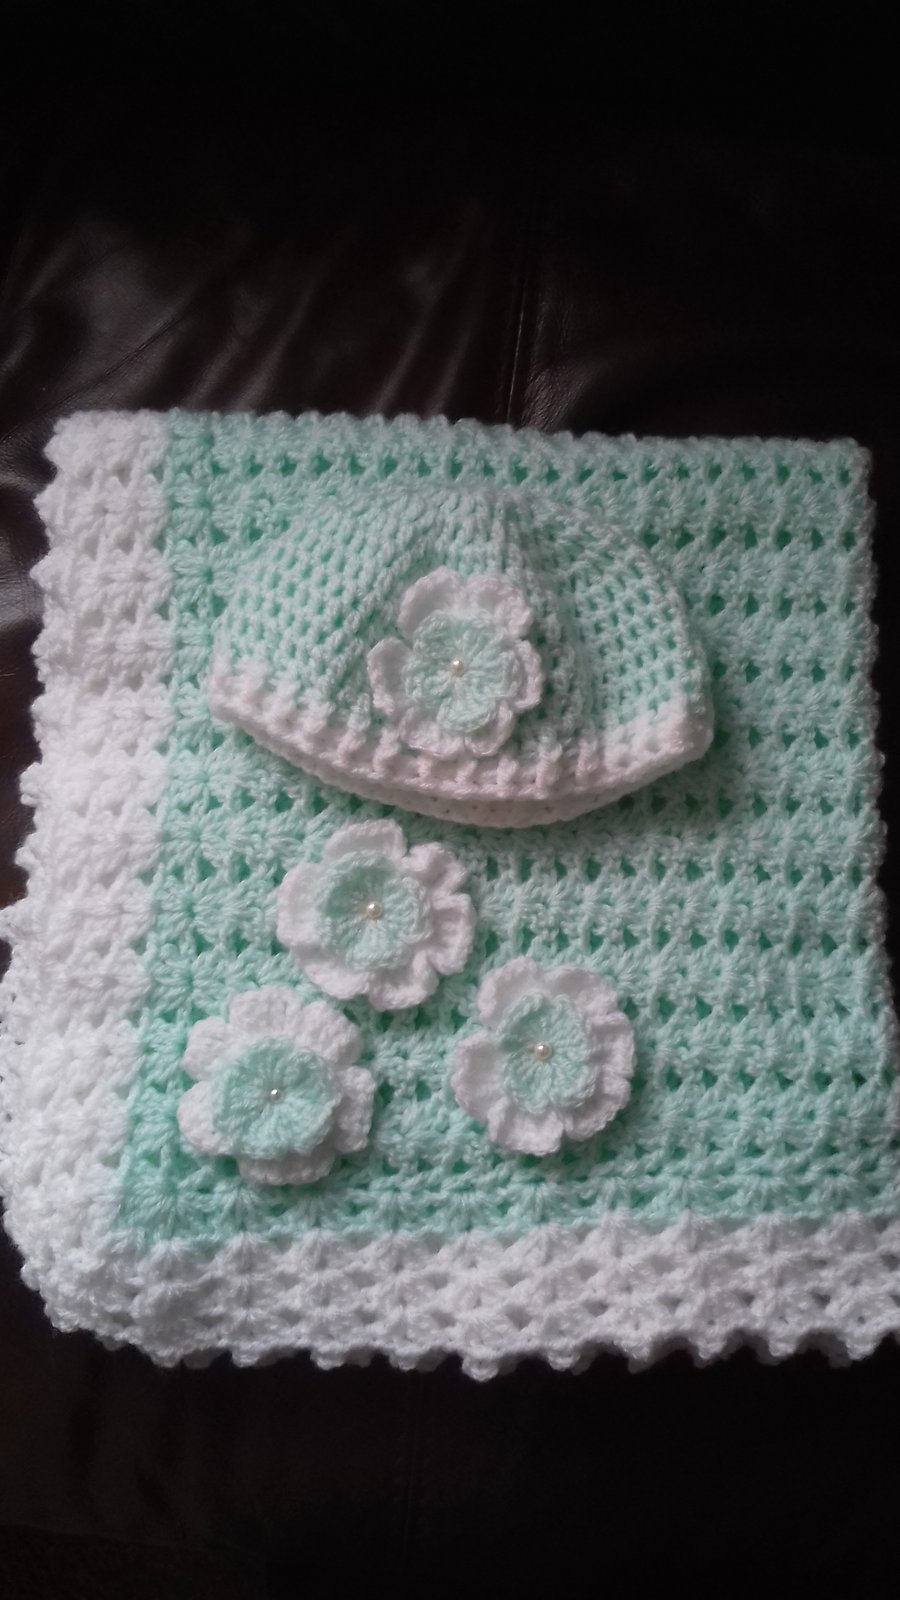 Crocheted baby hat and blanket pale mint and white with crocheted flowers gift 